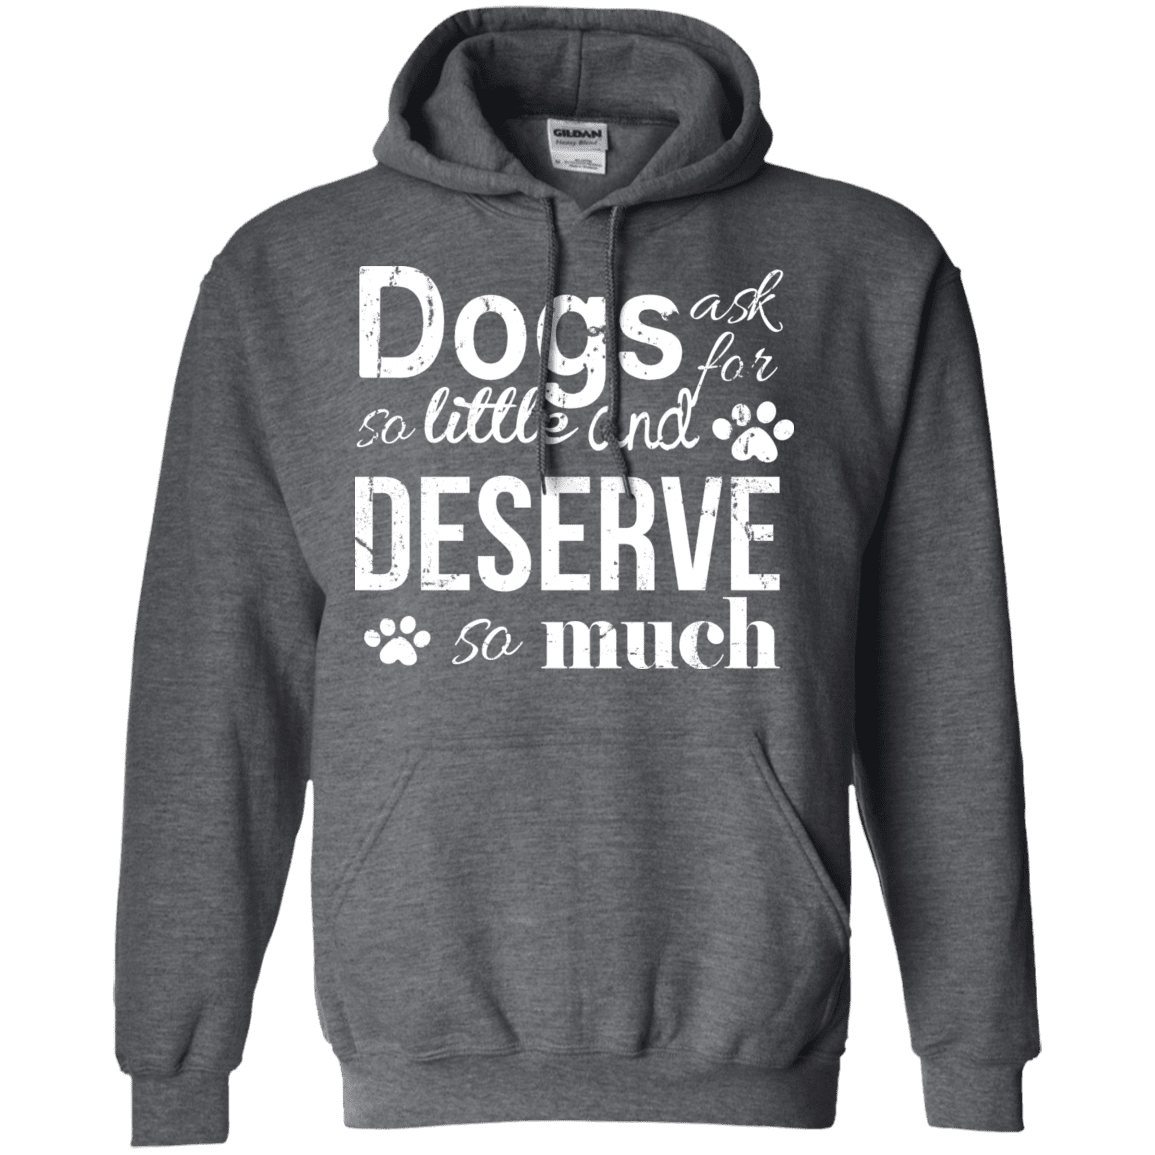 Dogs Deserve So Much - Hoodie.